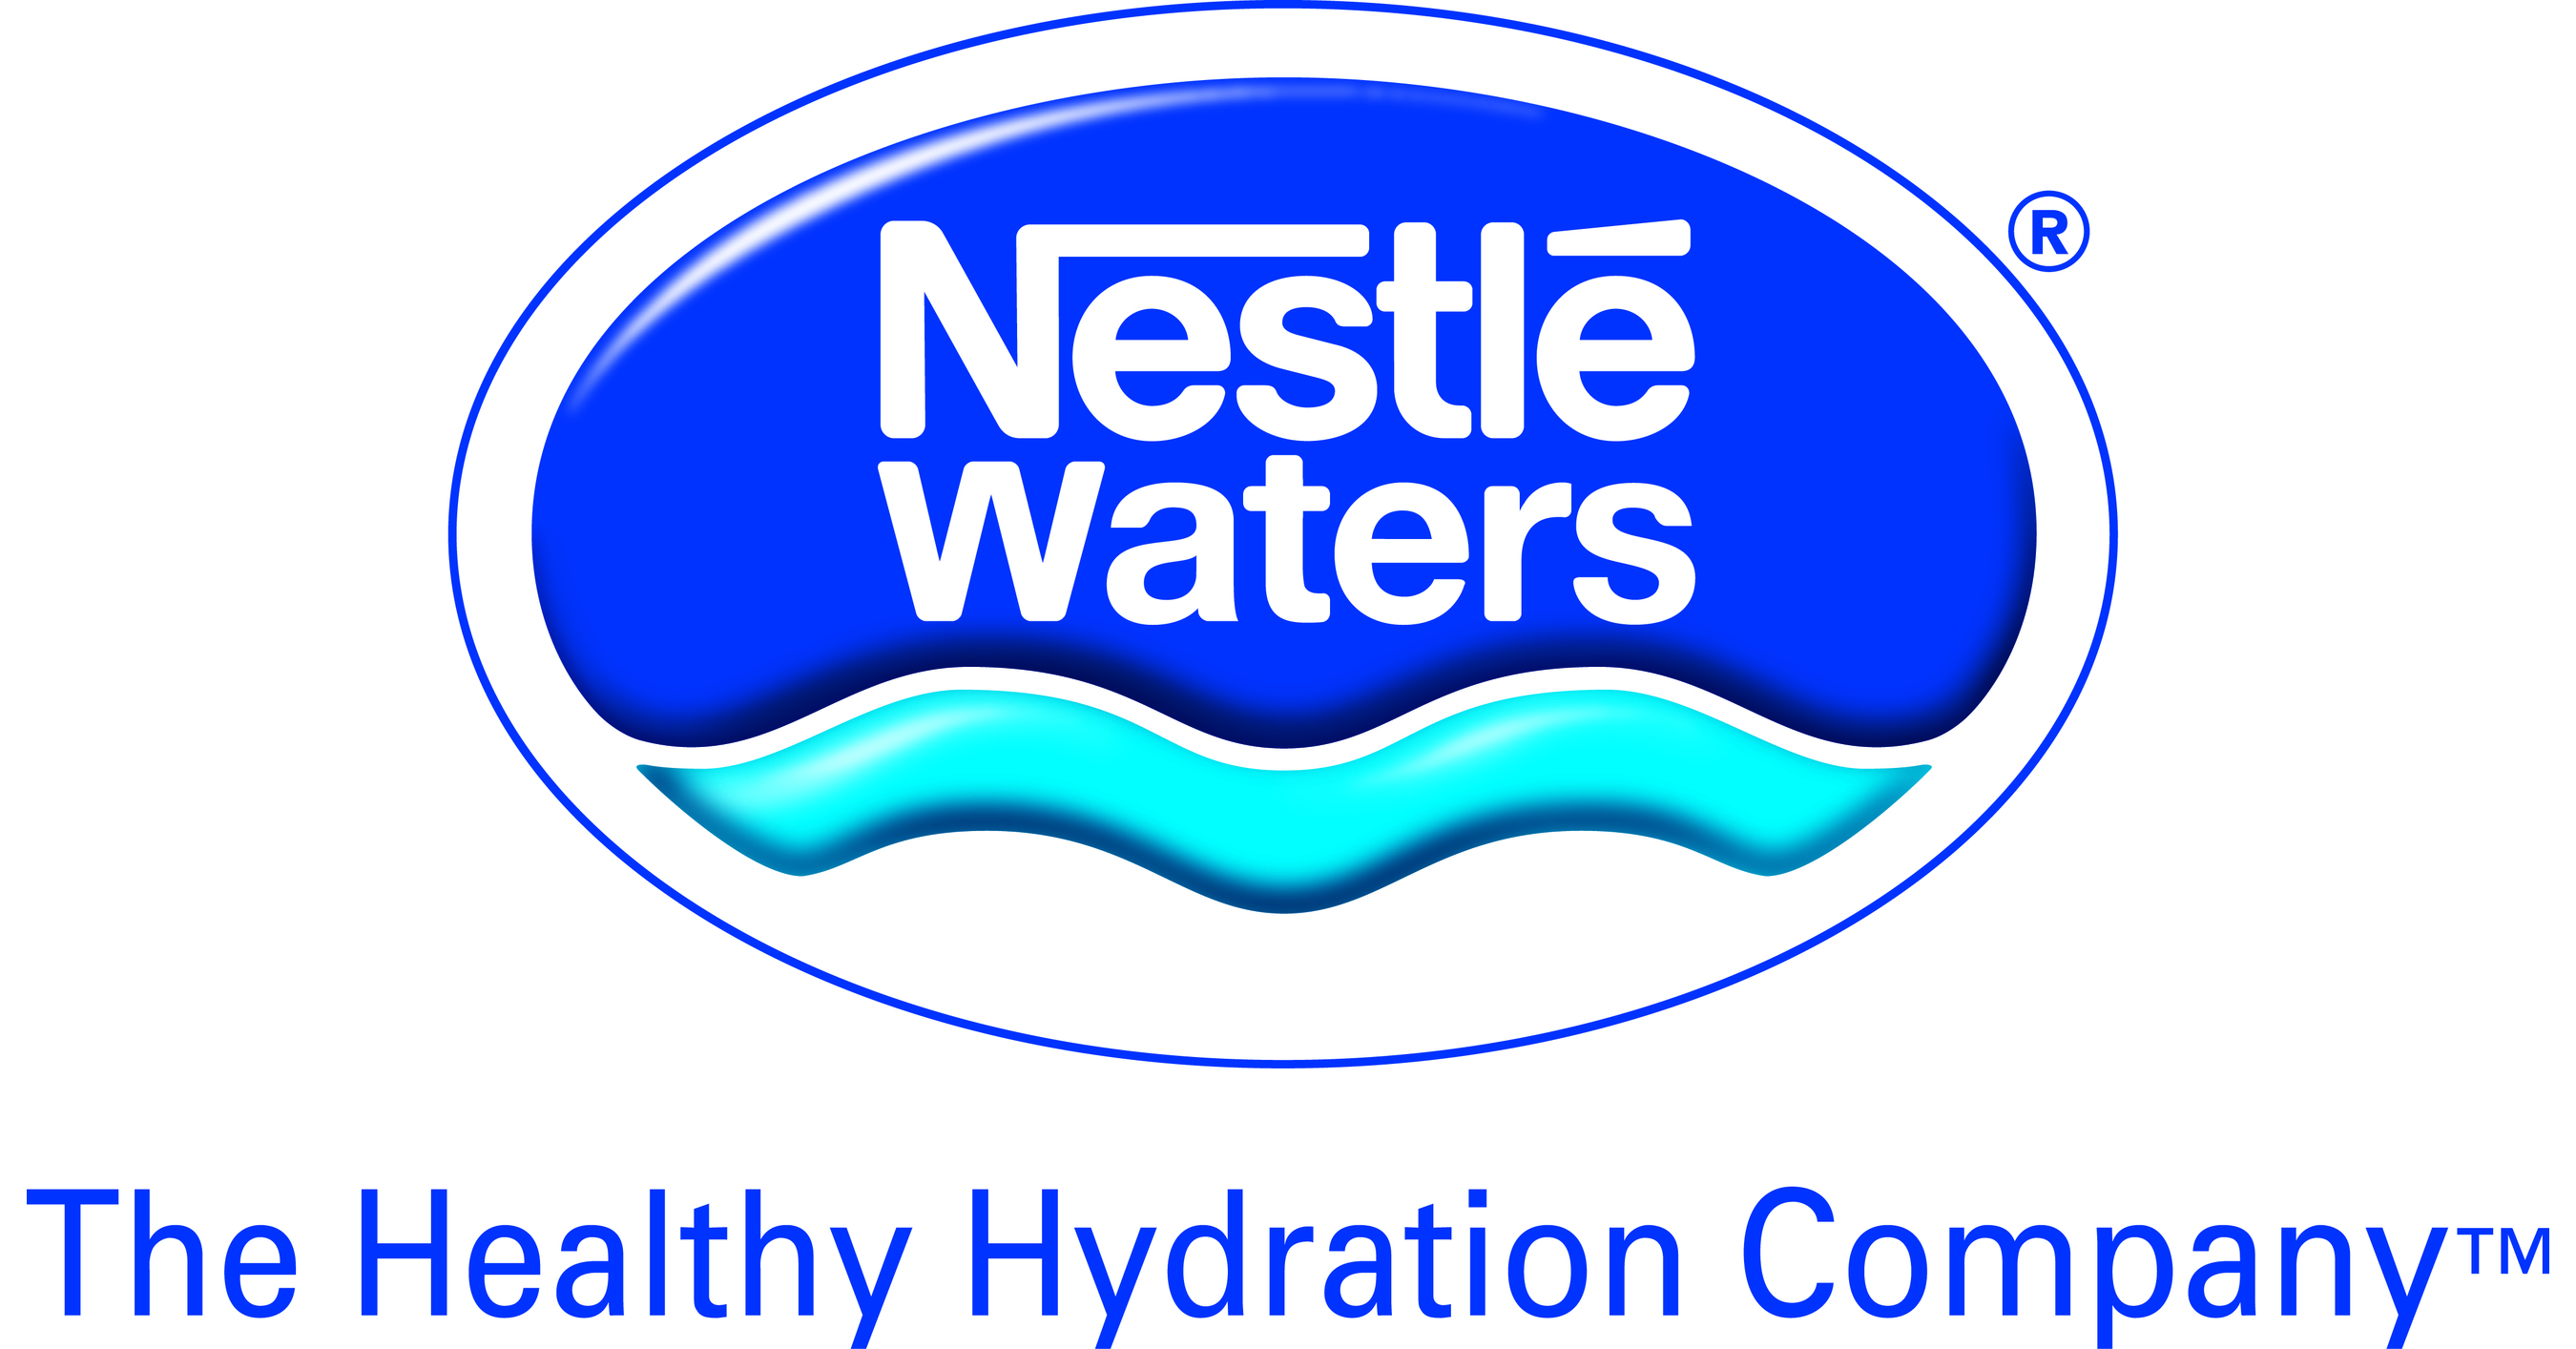 Nestlé Waters North America's Total Economic Impact in Florida Exceeds $256  Million, According to New Study